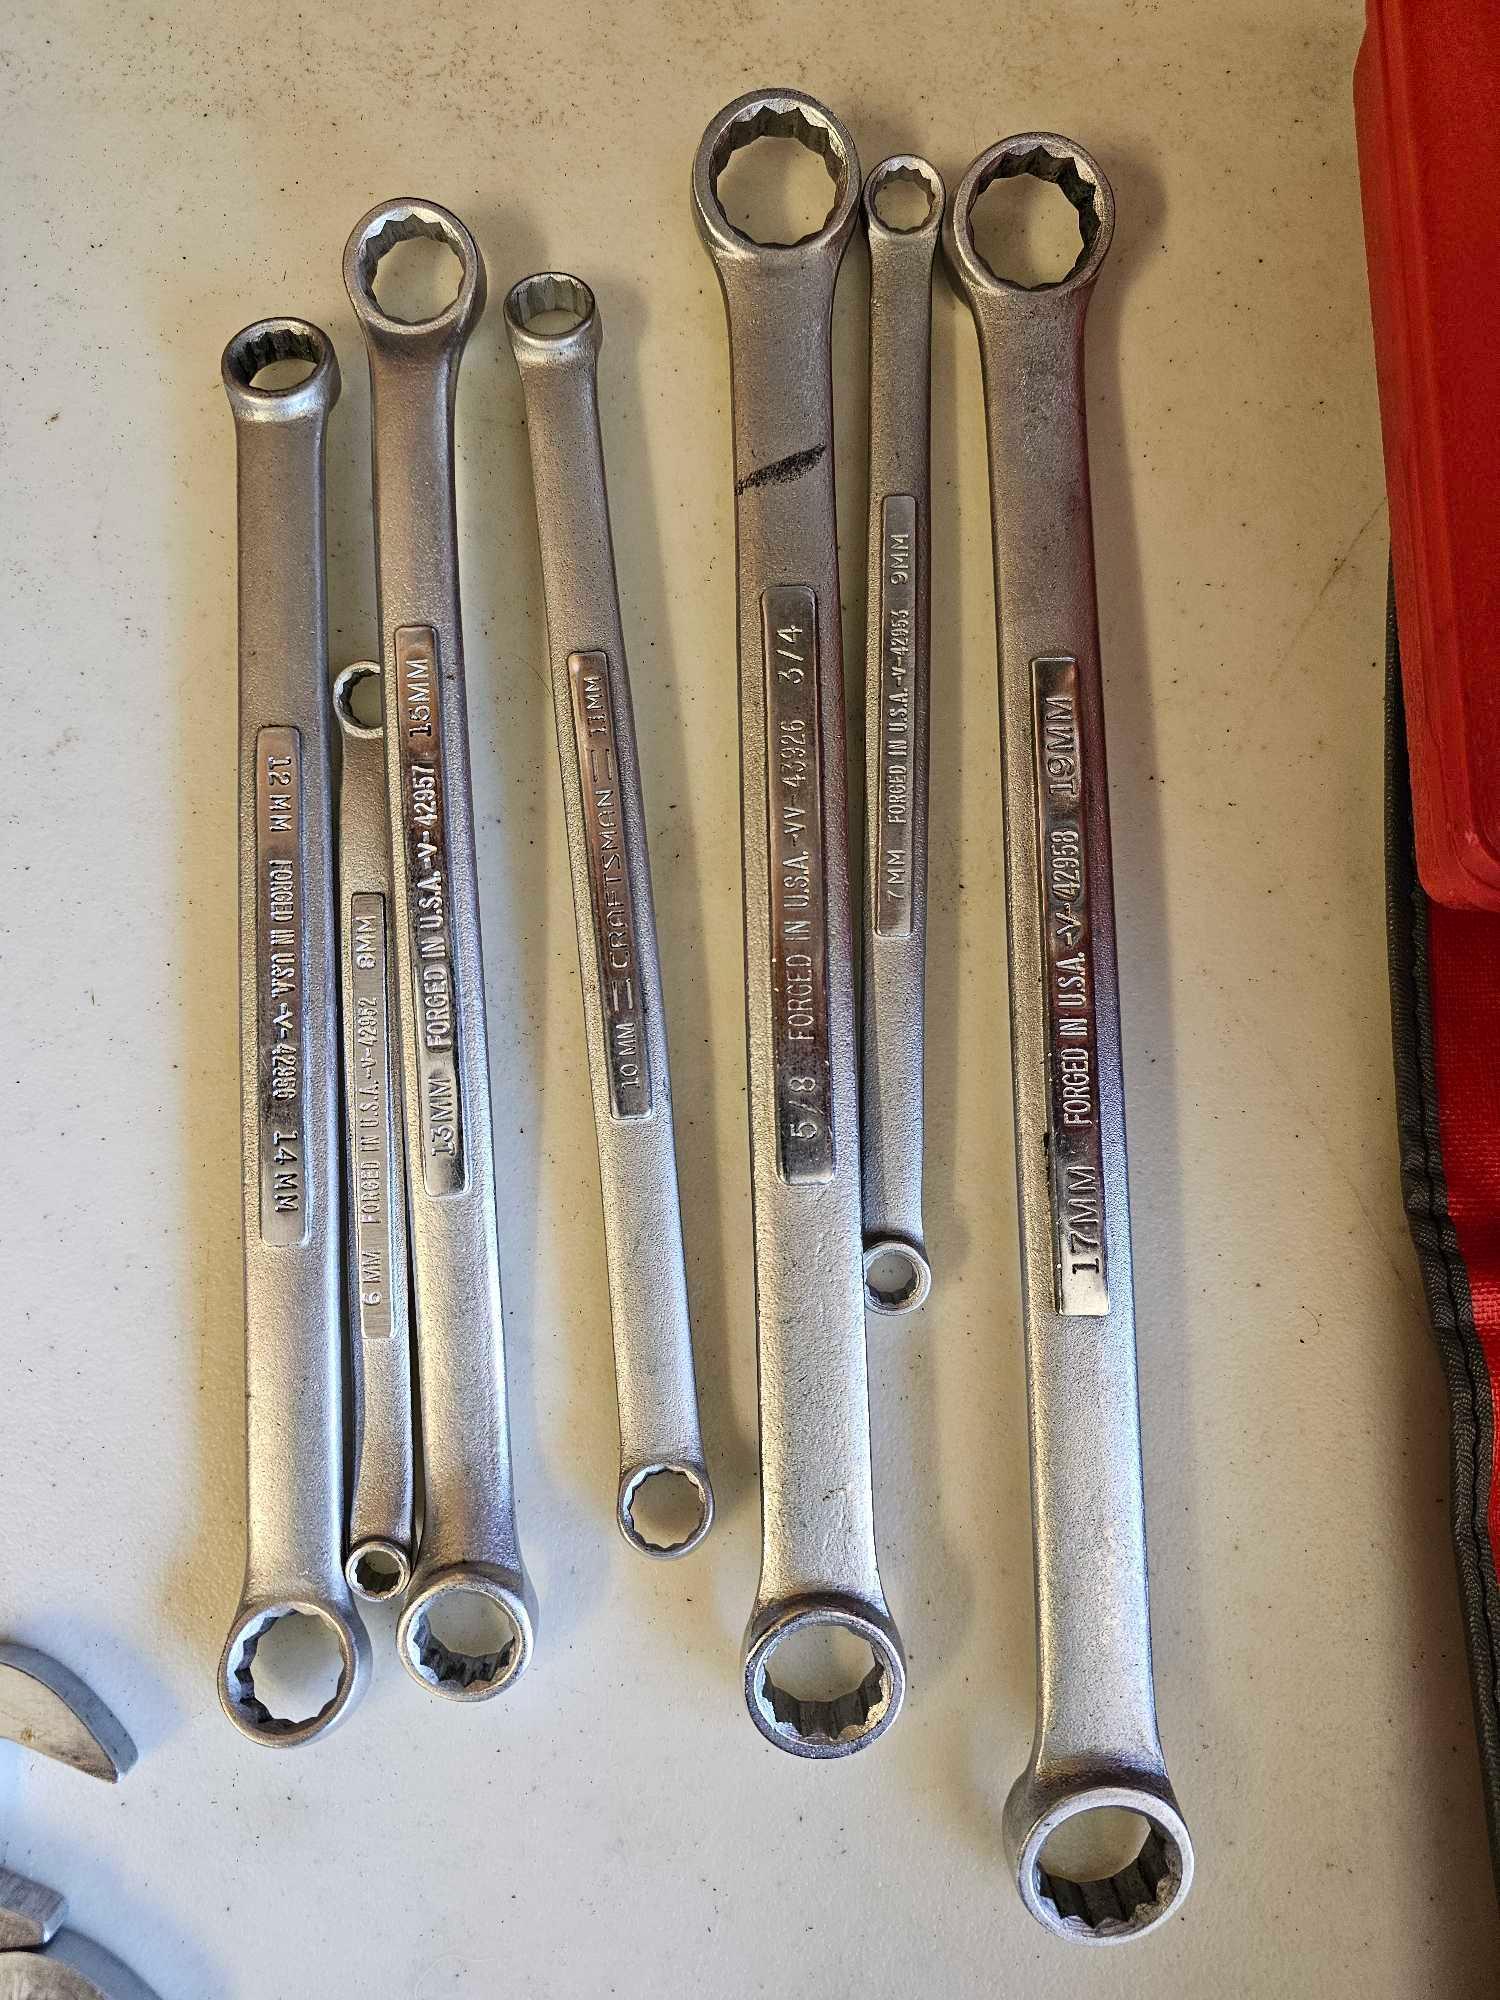 CRAFTSMAN BOXED AND OPEN END WRENCHES